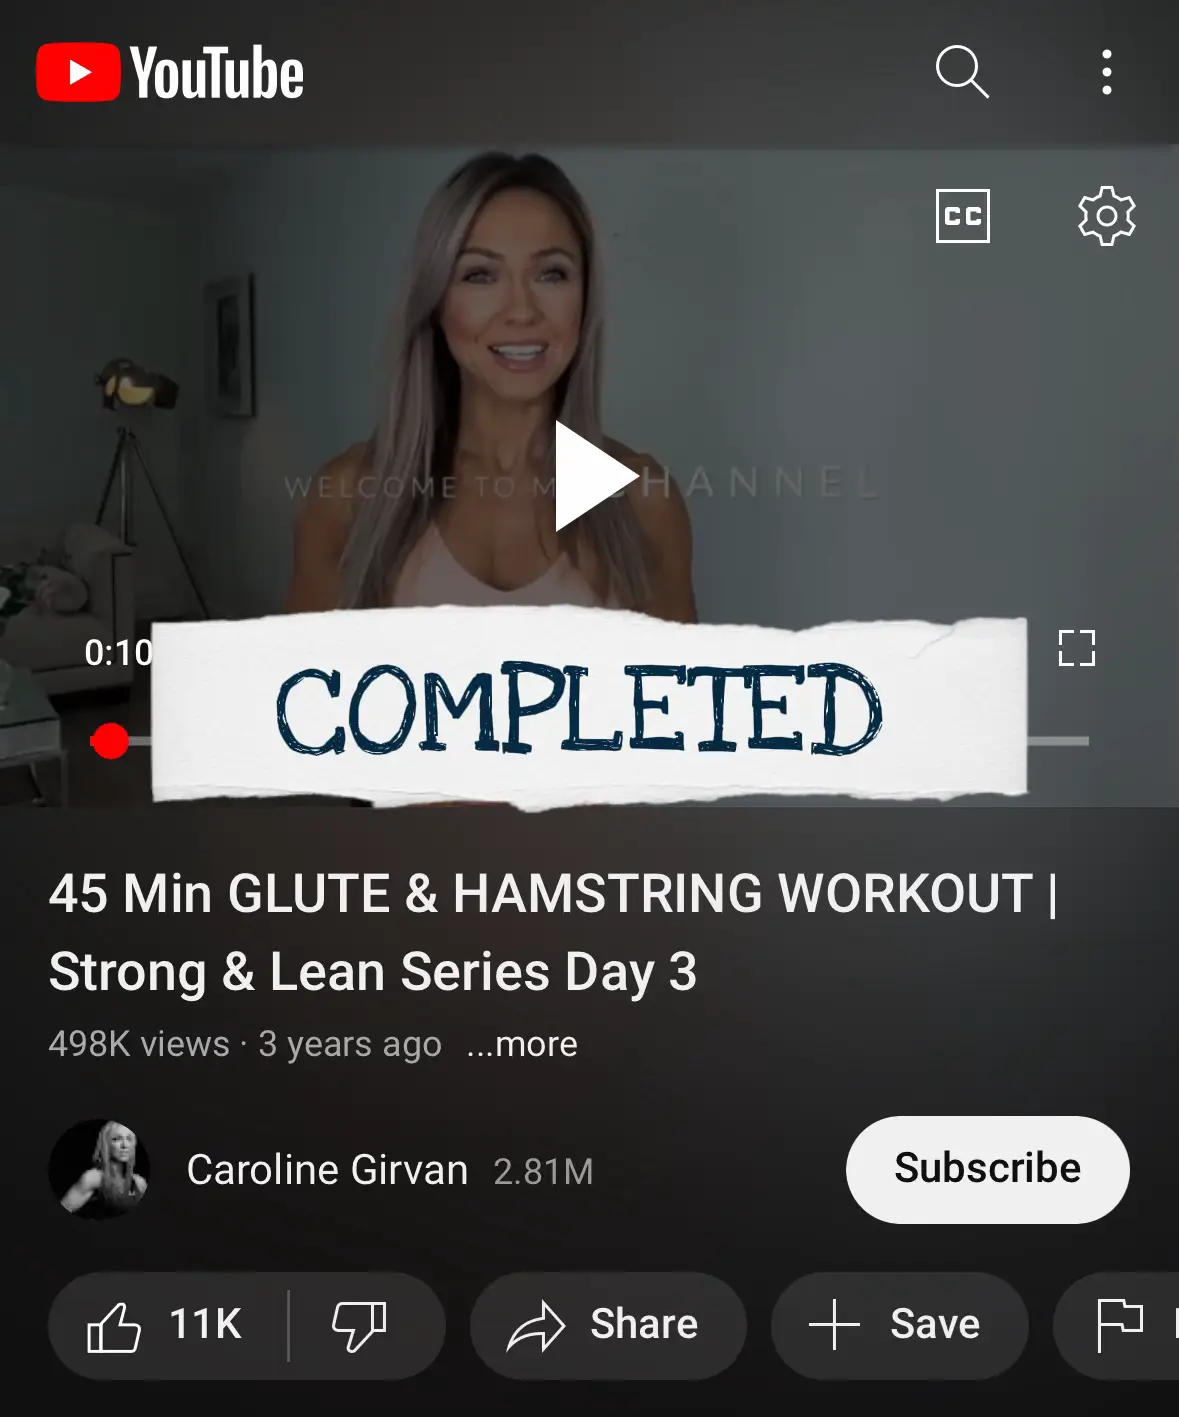 3 months of Caroline Girvan workouts still going strong very epic wowz